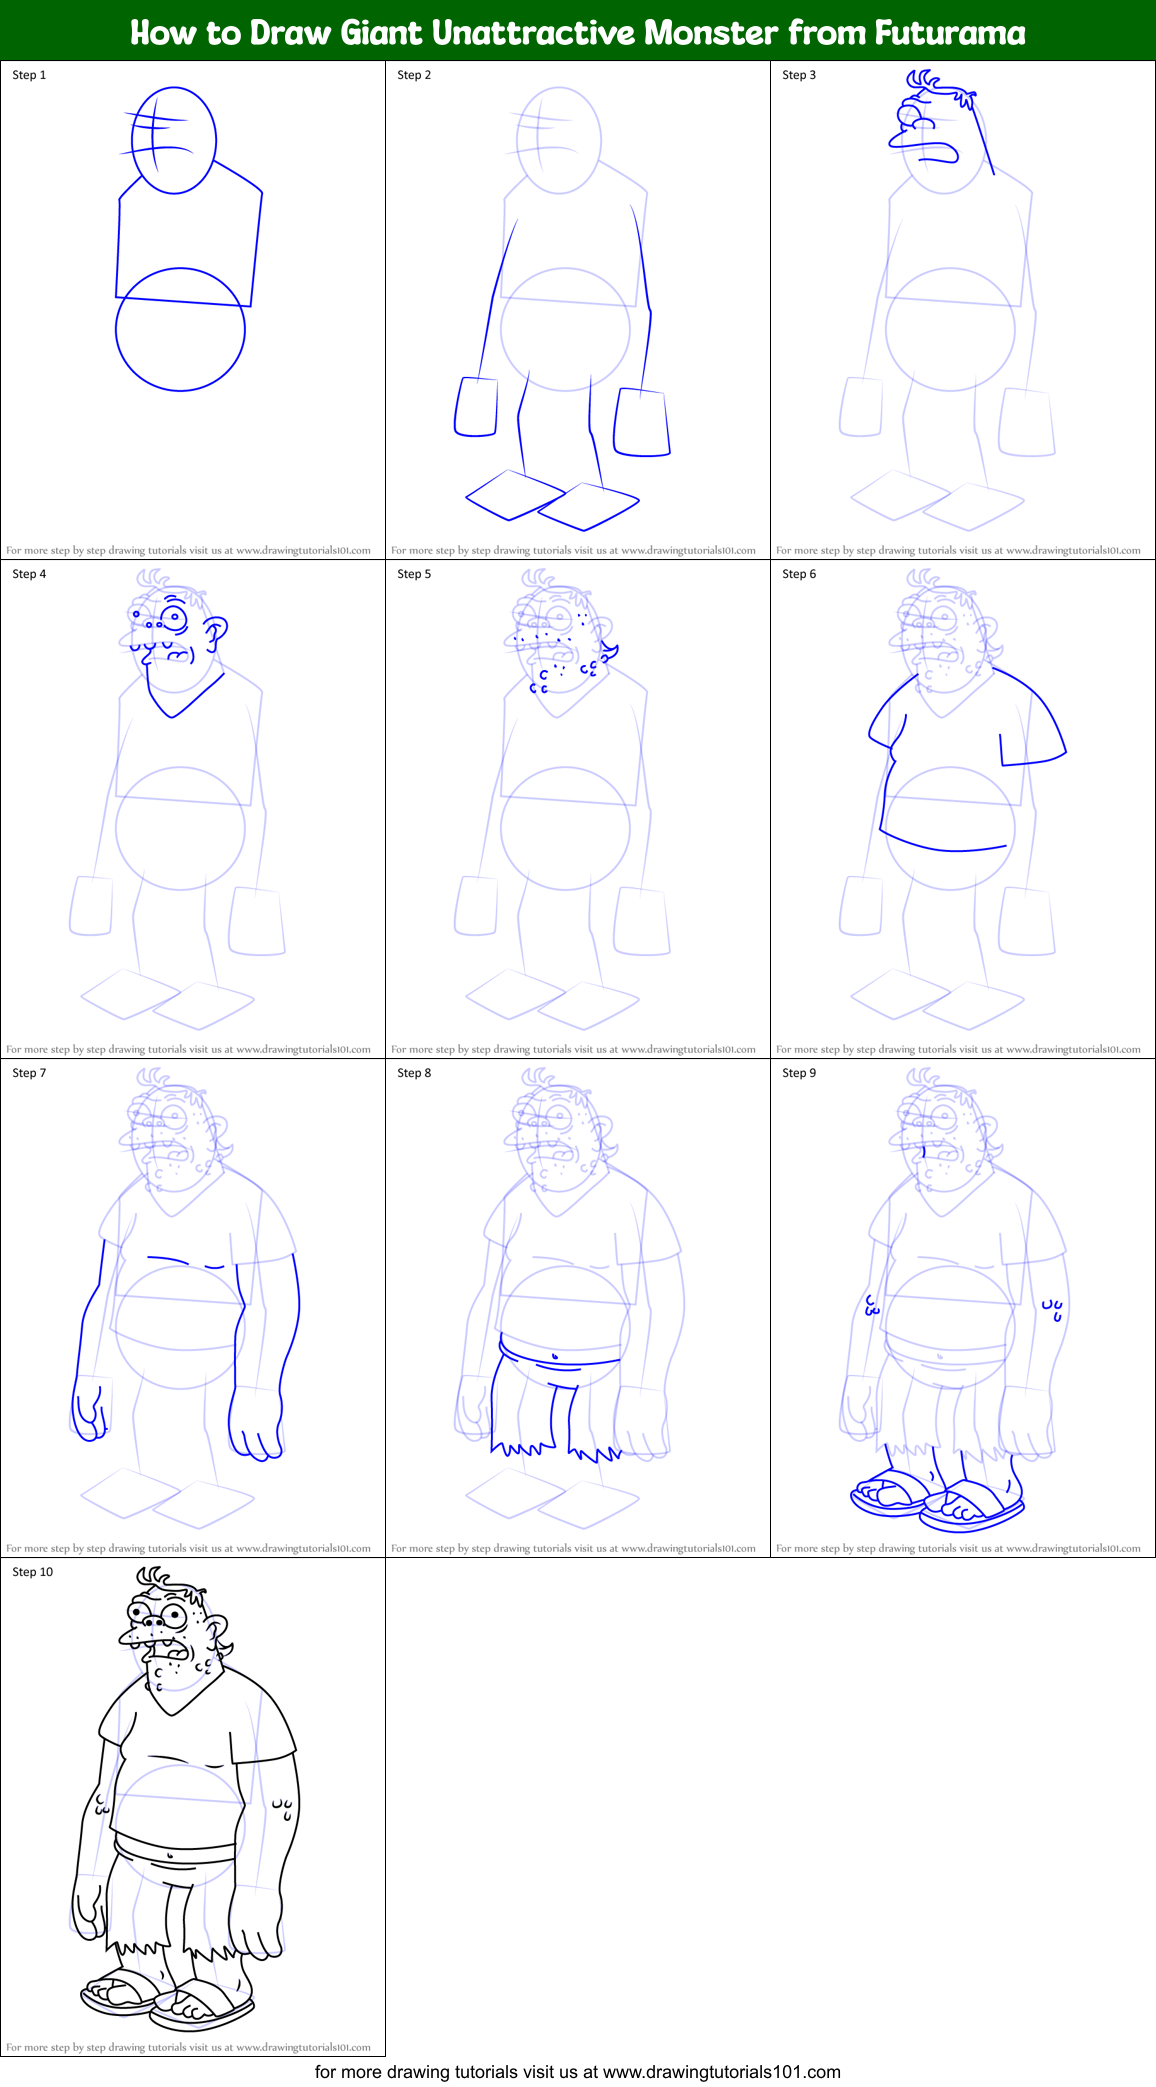 How to Draw Giant Unattractive Monster from Futurama printable step by